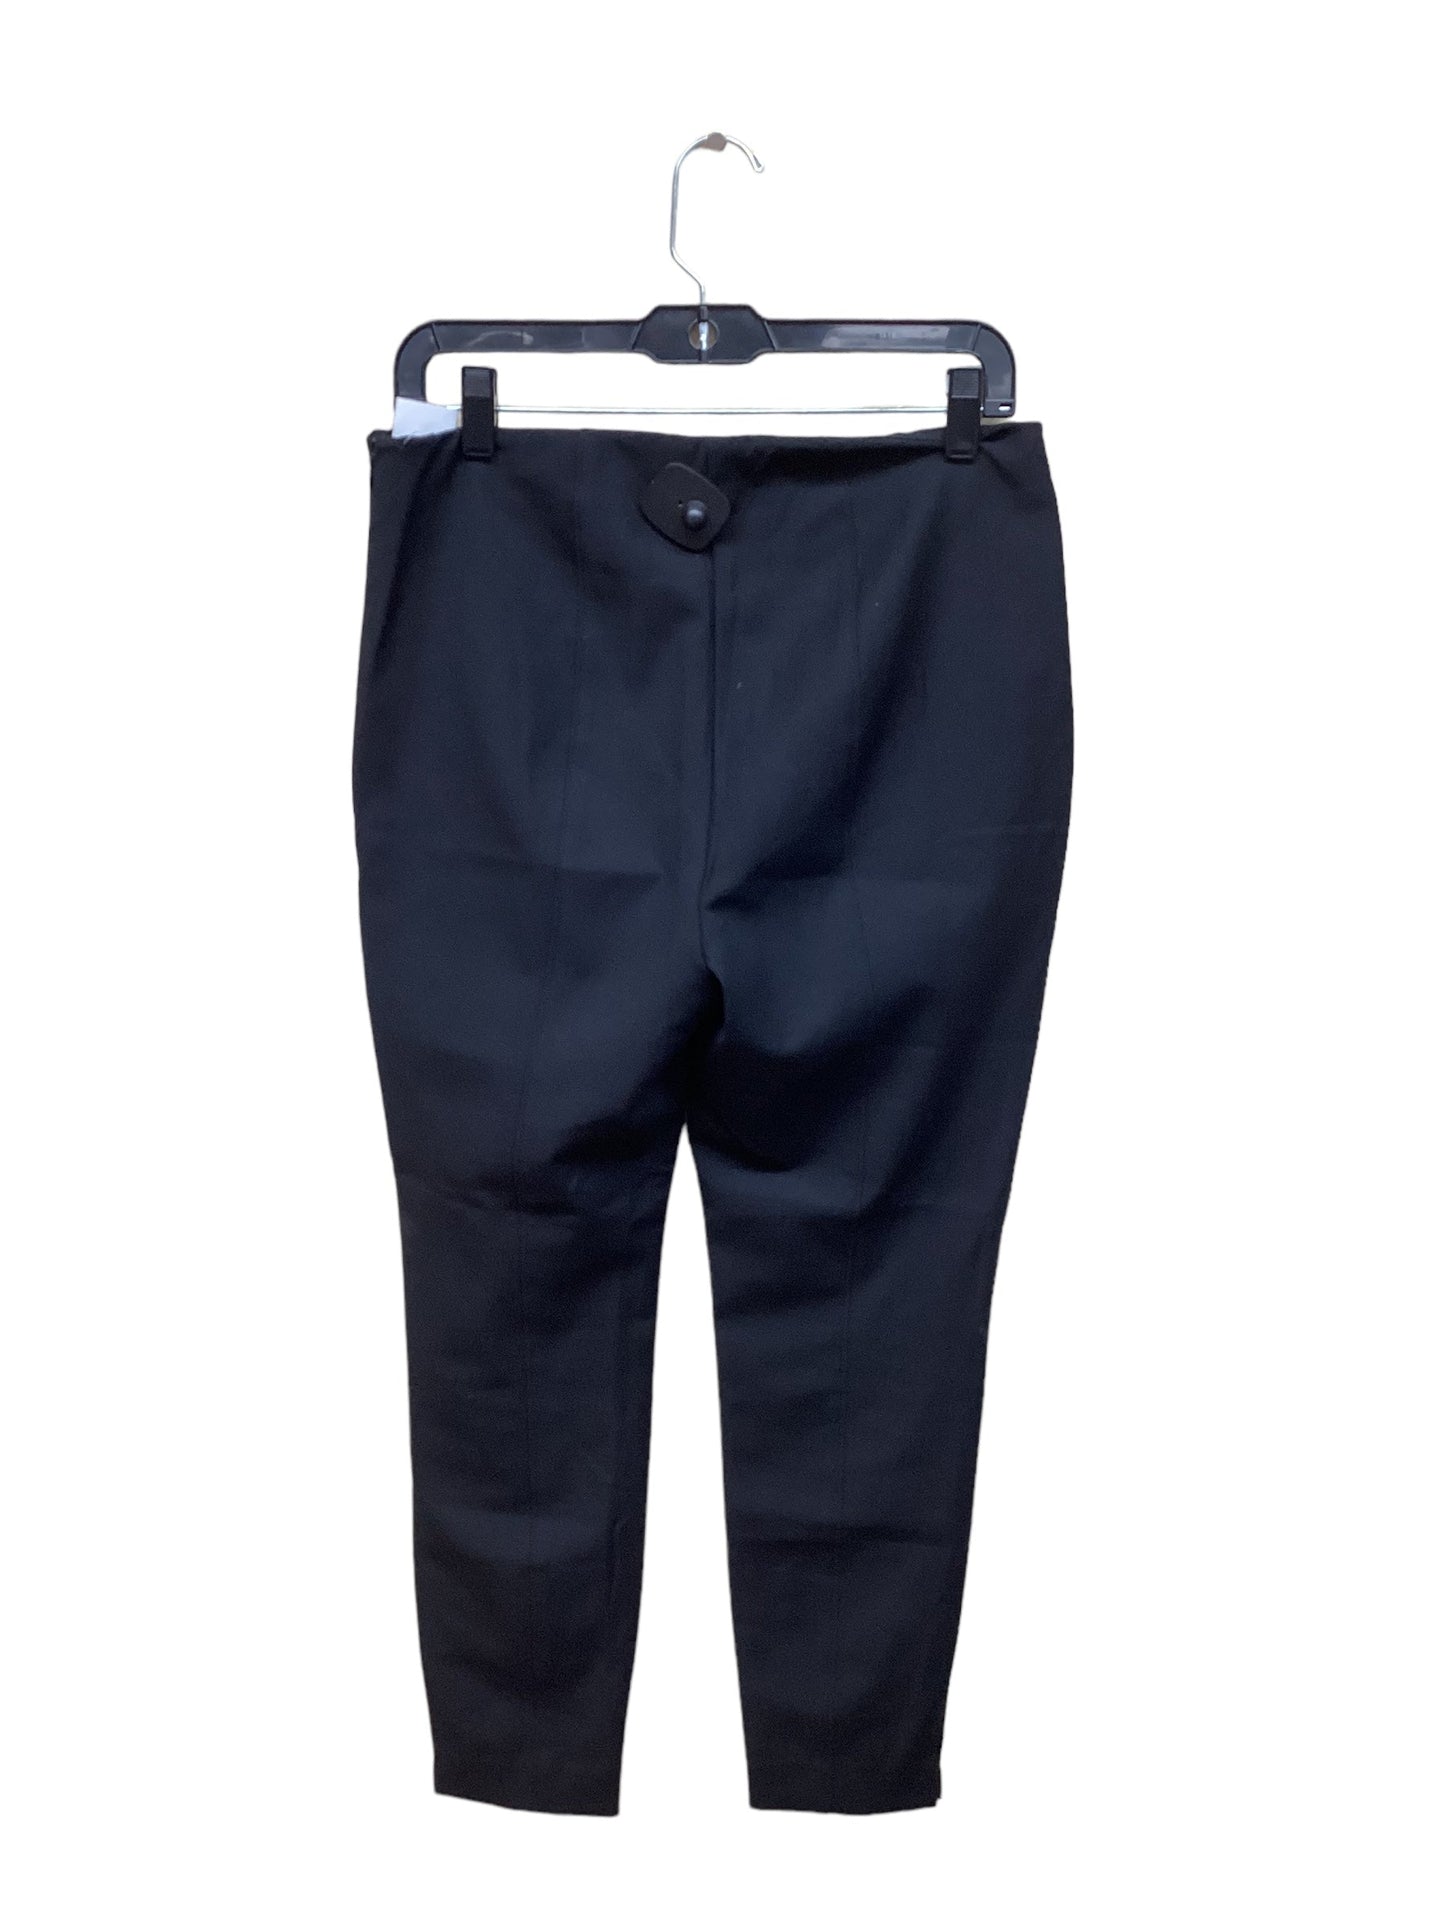 Pants Ankle By White House Black Market